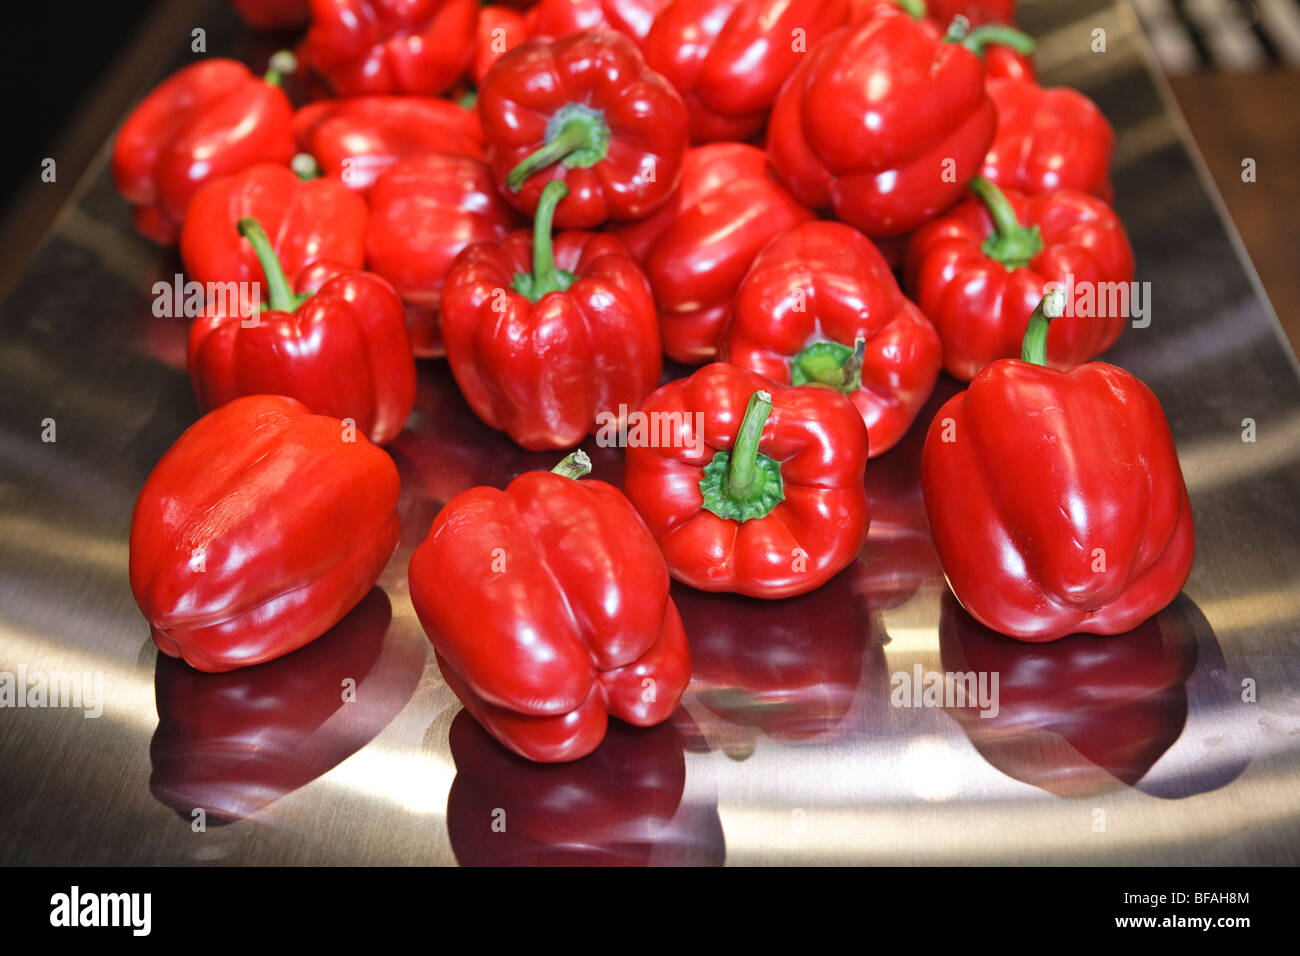 Red bell peppers on metal scoop Stock Photo